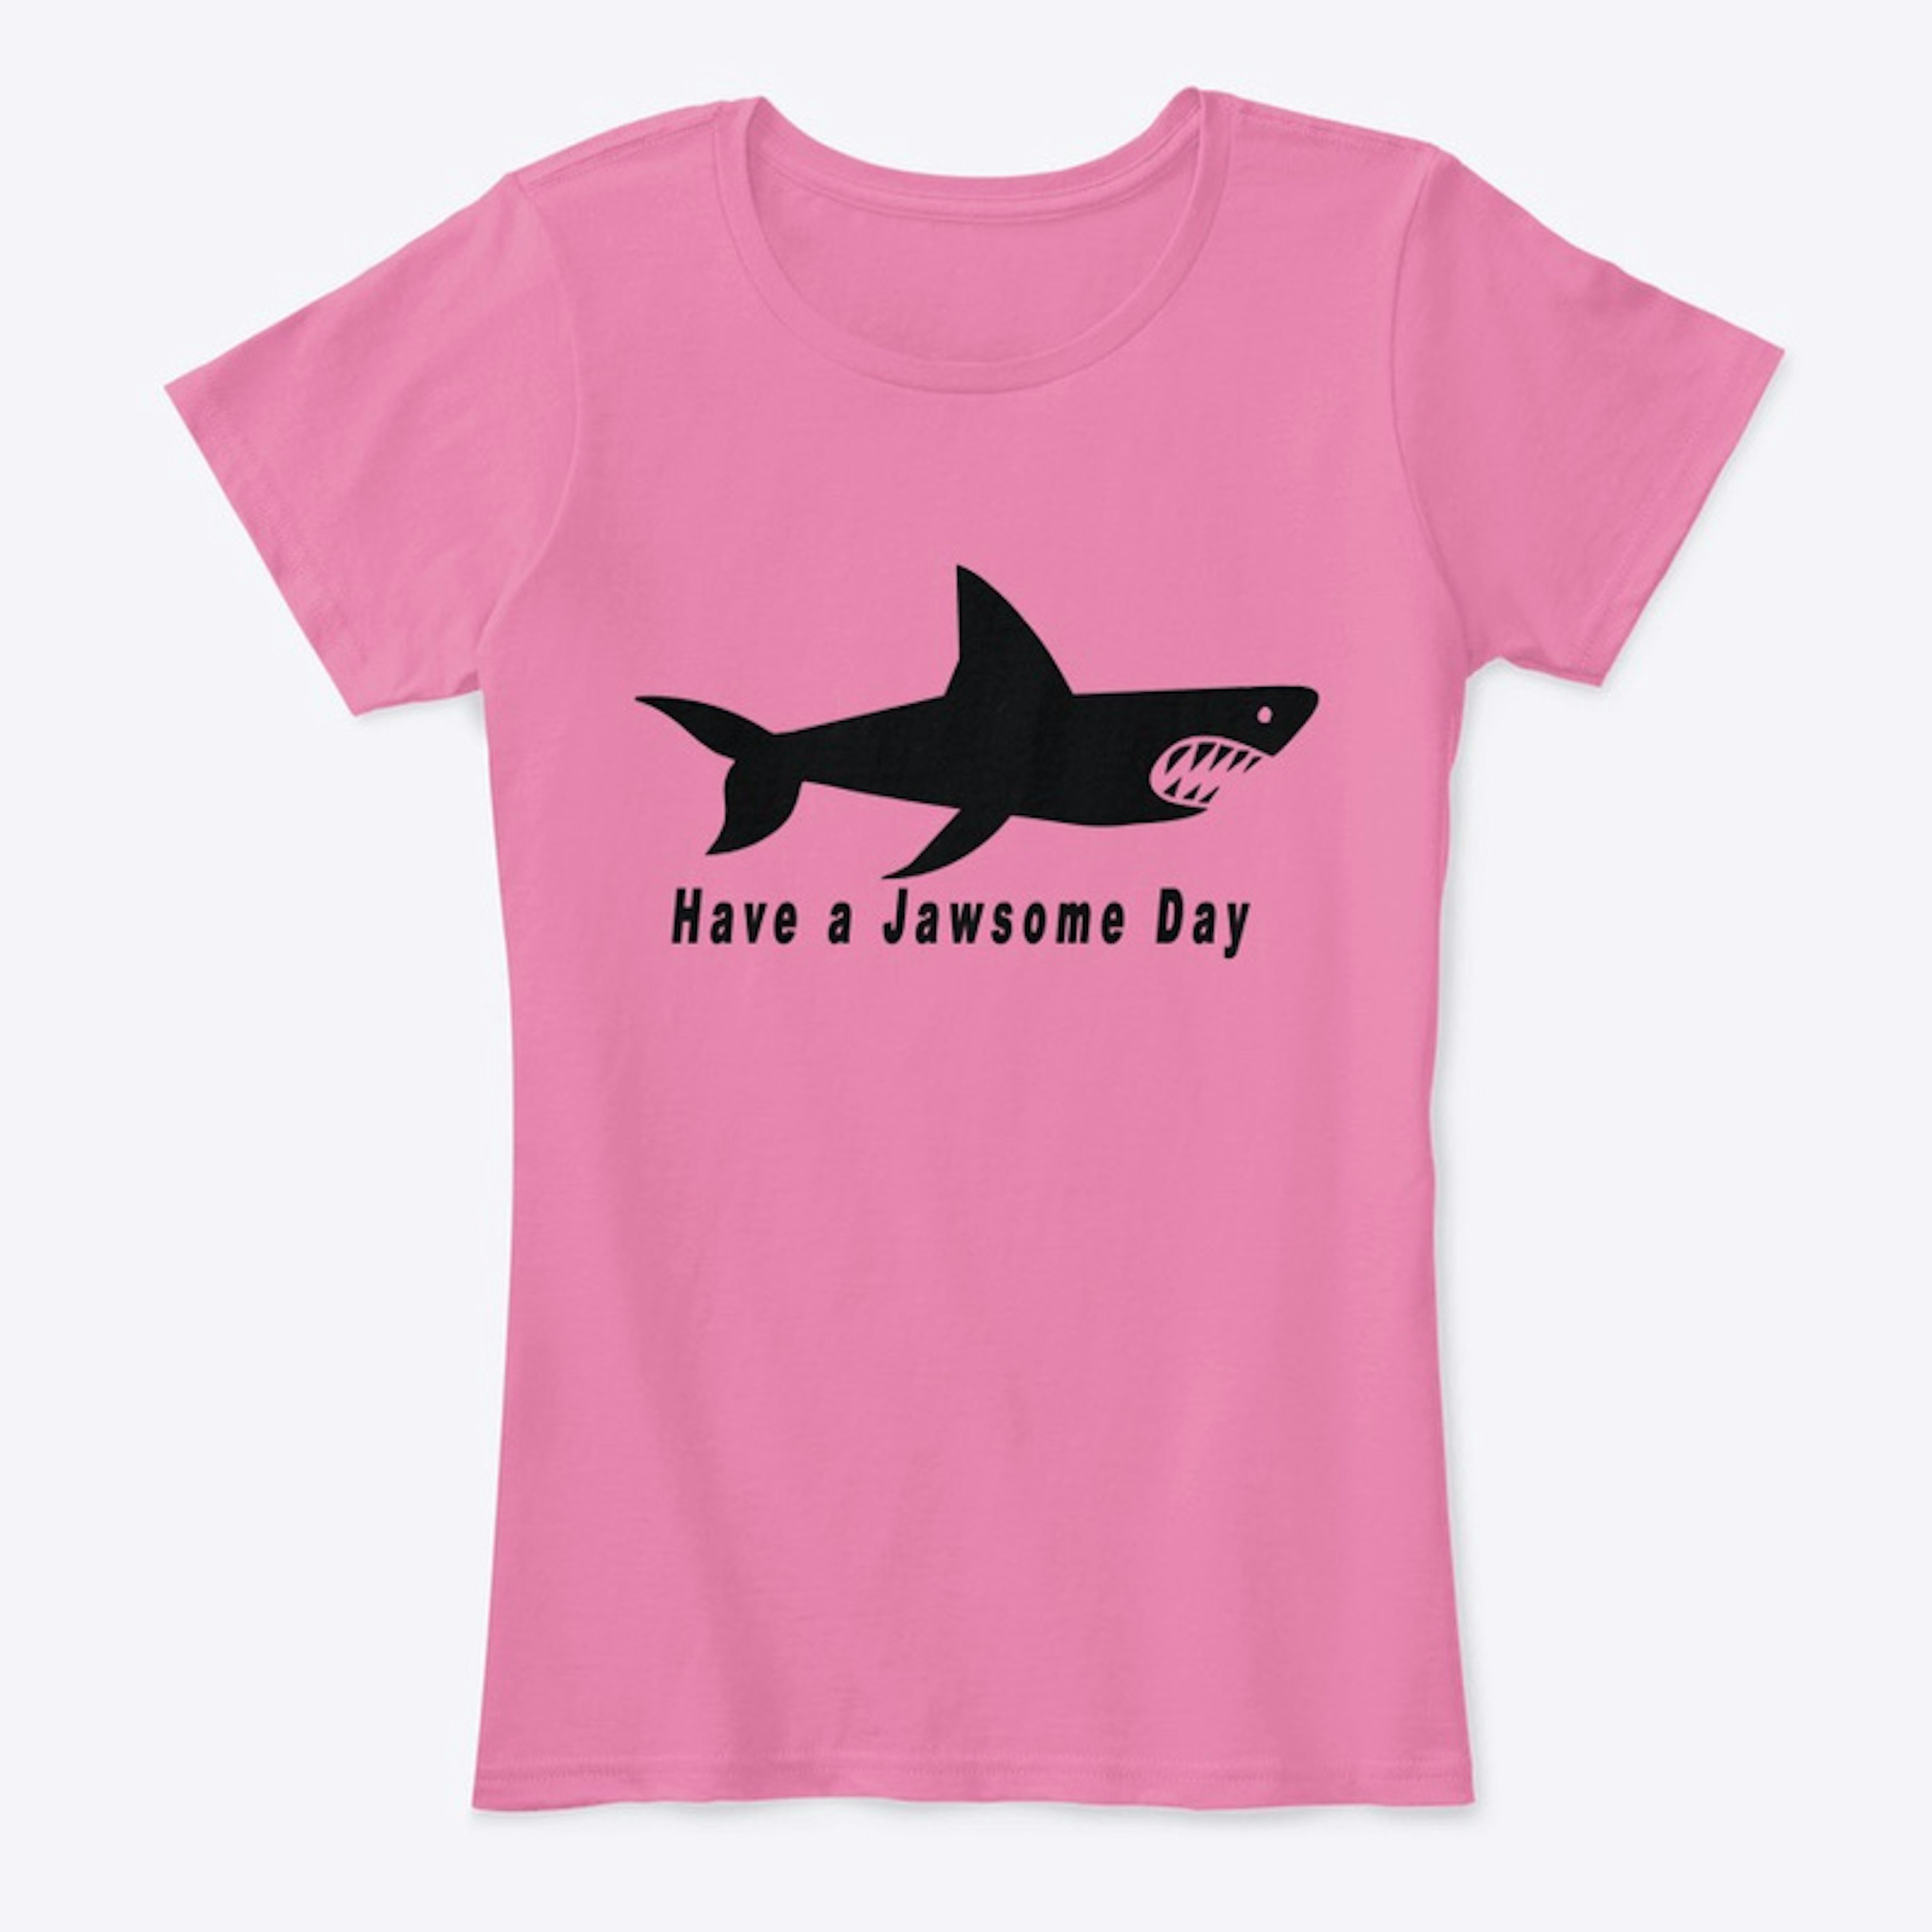 Have a Jawsome Day